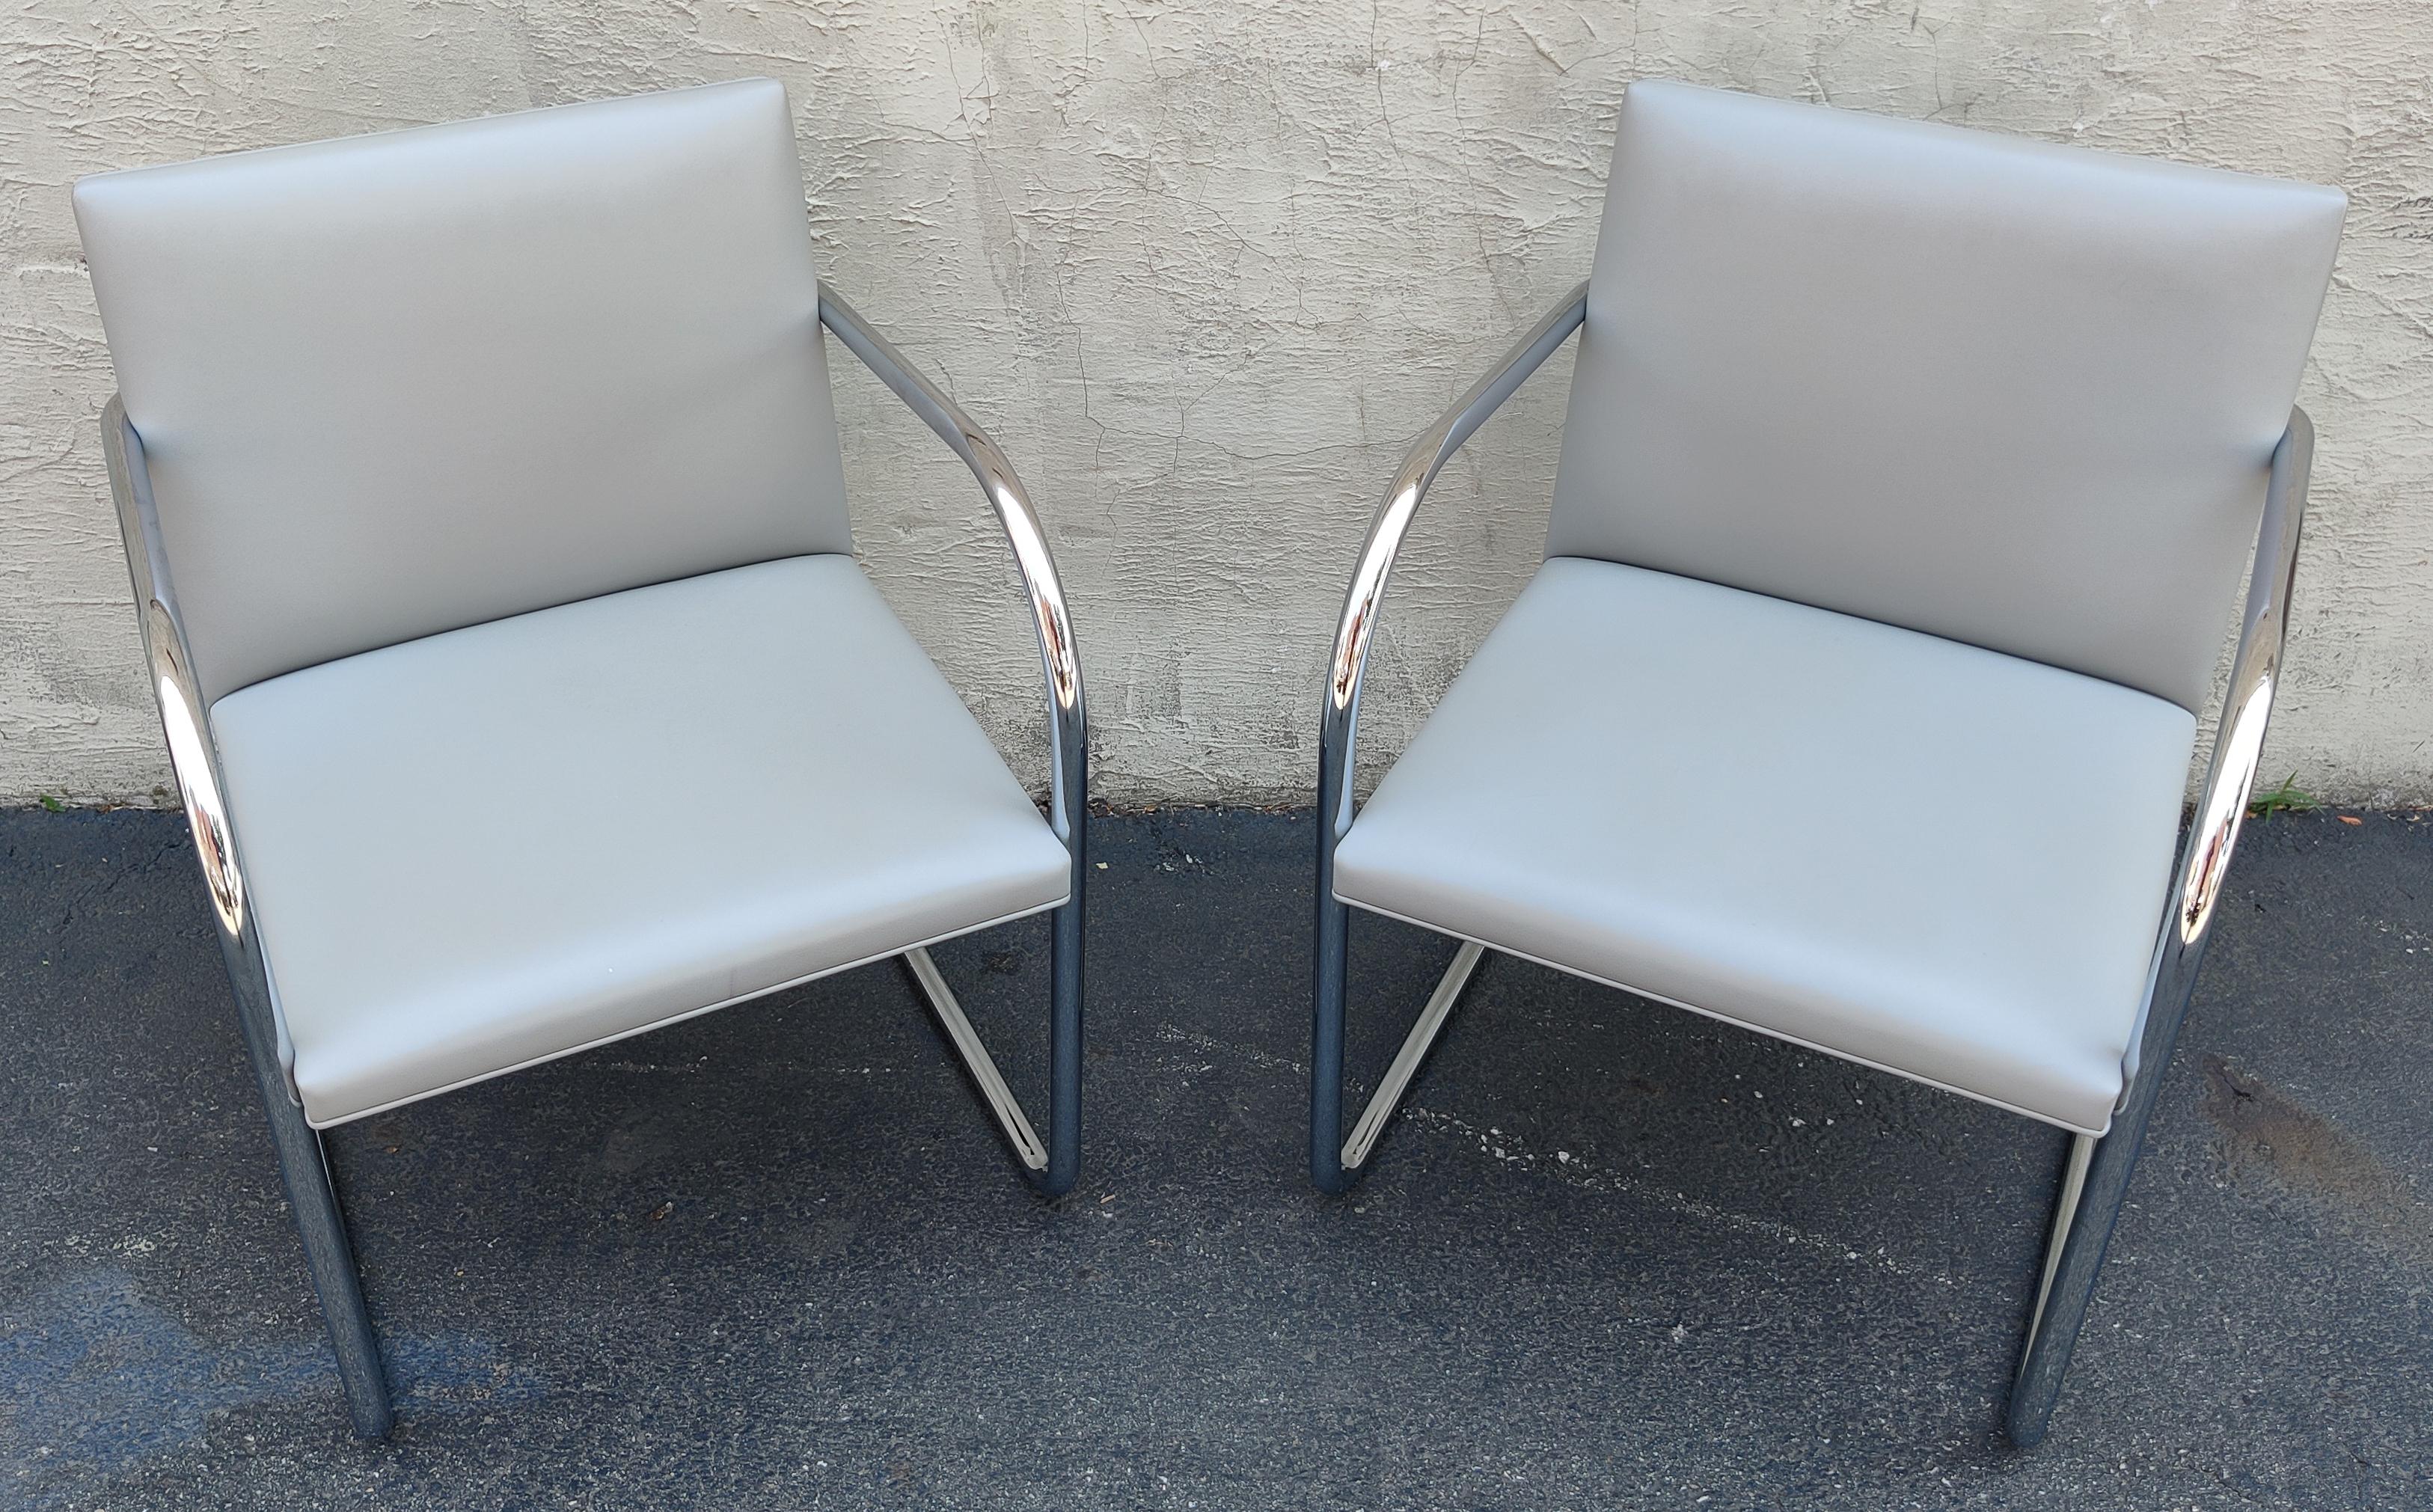 Designed in the 1930s by Ludwig Mies van der Rohe, this pair of BRNO chairs were made by Knoll. They feature a handosme chromed tubular steel frame and a cantilever design that makes the chair look like it floats. This pair has a very pleasant slate